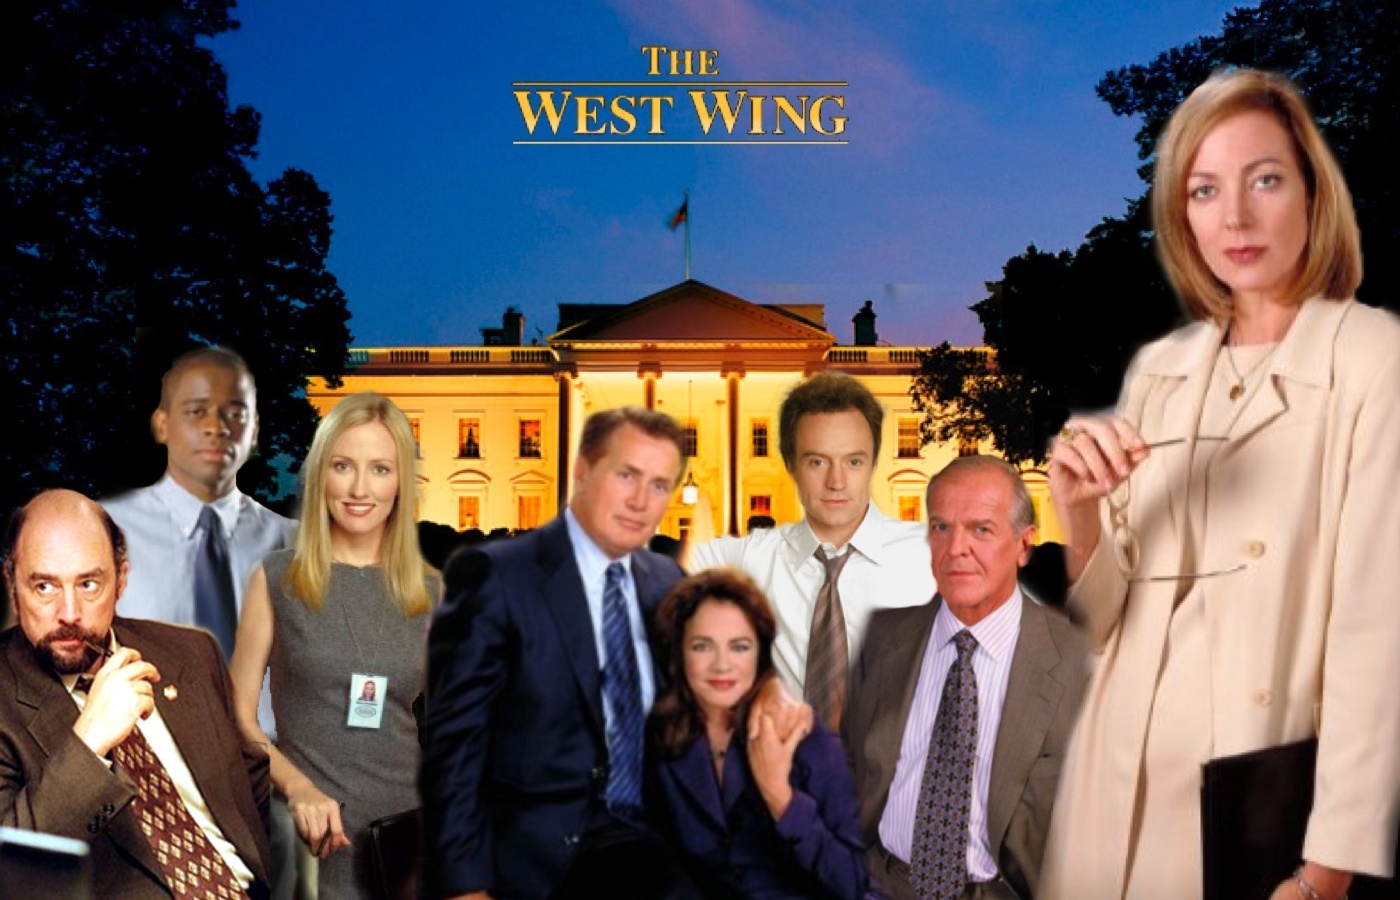 West-Wing-the-west-wing-3474866-1400-900